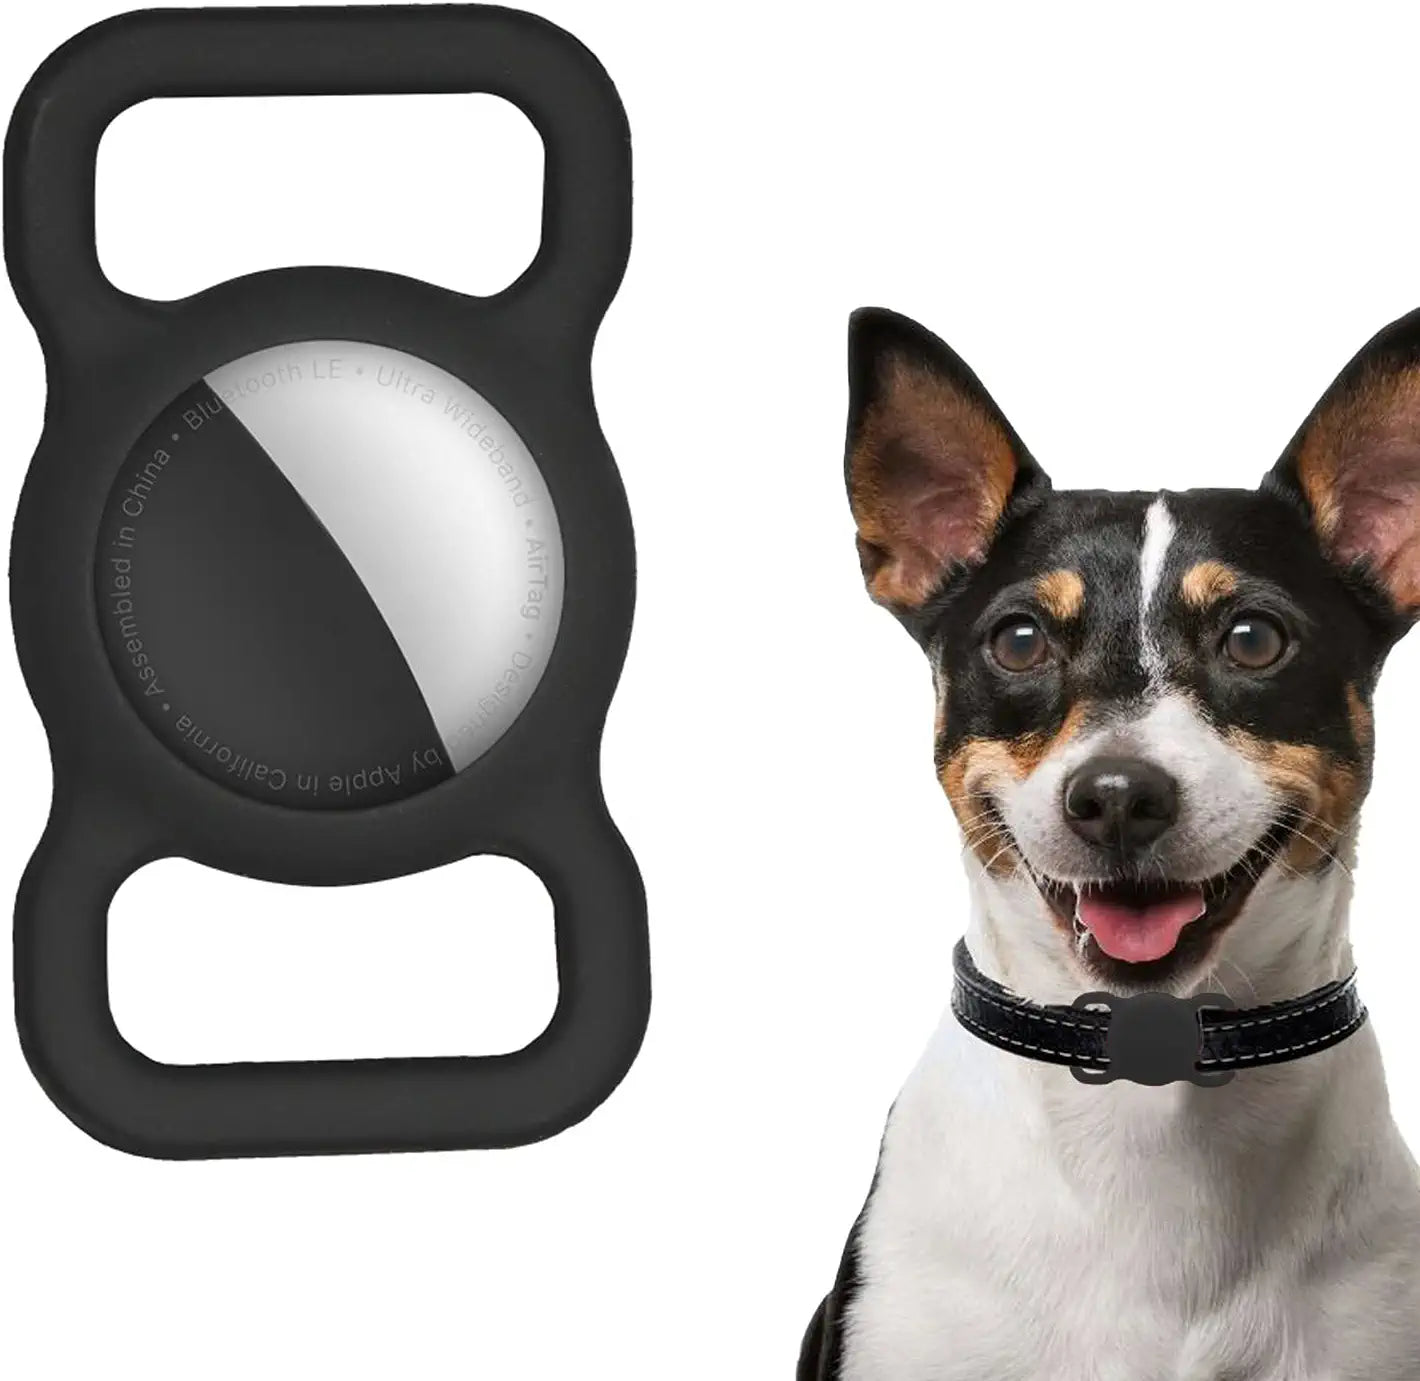 Air Tag Dog Collar Holder Waterproof Small Compatible Protective Cover for Apple Airtag GPS Tracking Dog Cat Soft Silicone Waterproof Protective for Pet Dog Cat and Children Elderly Bags Electronics > GPS Accessories > GPS Cases YAFIYGI Black  